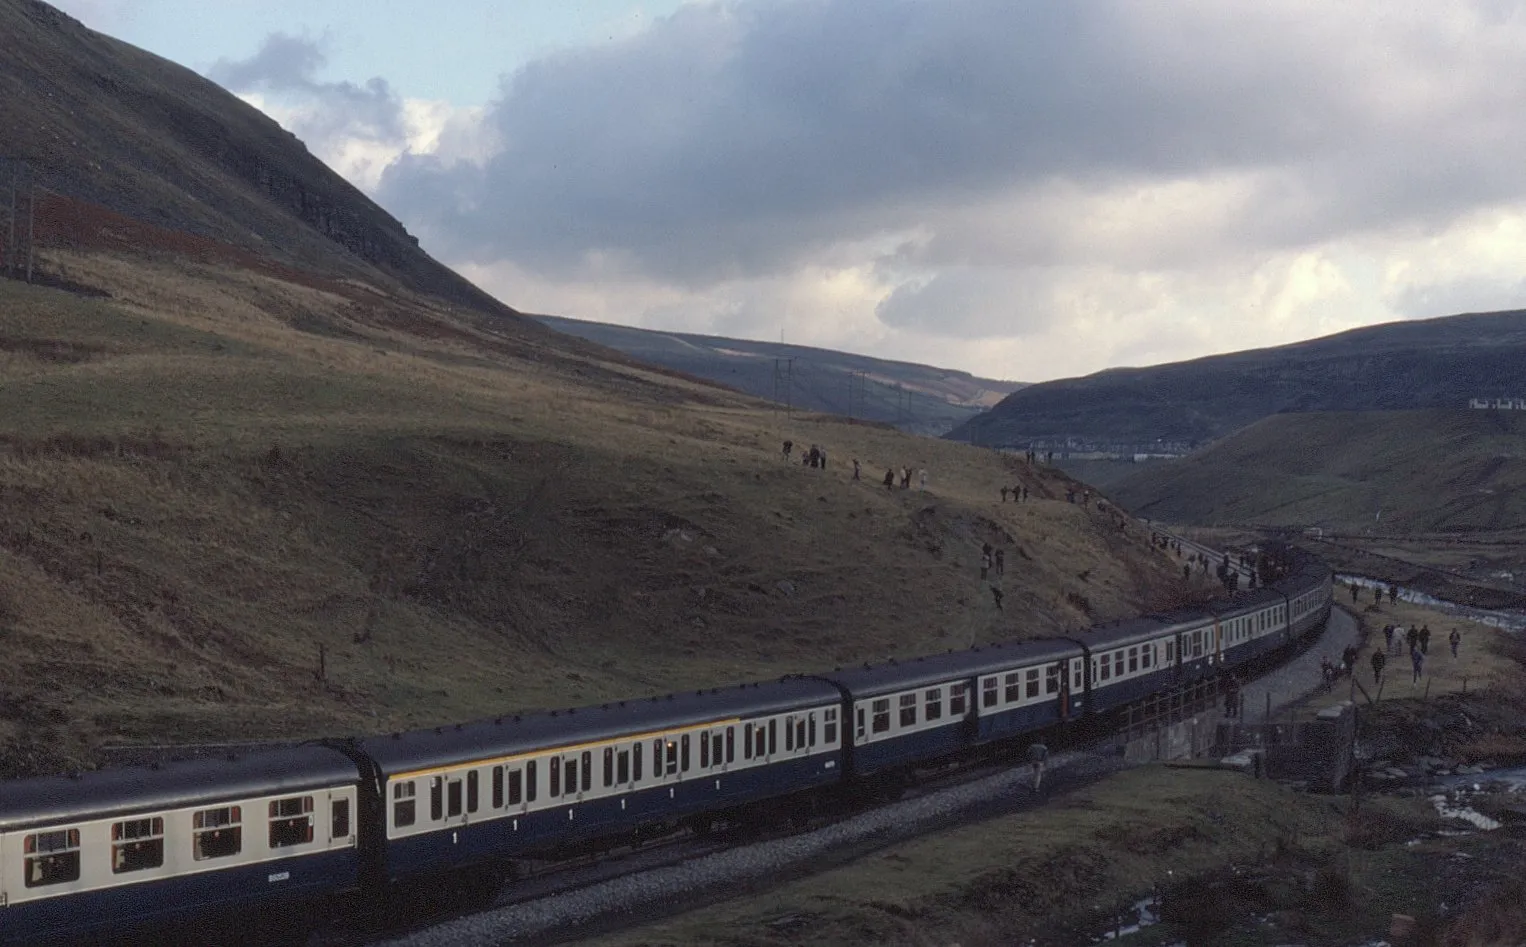 Photo showing: 12-car "Hastings" DEMU formation a long way from home. As already detailed with other photographs, the mid-1980s were to be the swansong for the popular units. As such, they were chartered for some long distance railtours well beyond the Southern Region.

On 5 January 1985, 6L sets 1017 and 1032 were assigned to work 1Z27, 07:20 Watford Junction through to several branches in South Wales. Seen here at Maerdy Colliery is the "Cyrmru DEMU" tour during a 12 minute photo-stop.  It was amazing how often several hundred participants managed to leap off the train, climb up steep embankments and then rejoin the train in the short space of time! Tour operator was again Hertfordshire Railtours. Myself and many others living in the South East of England would be regular travelers as they would start and pick up in the London/M25 catchment area.